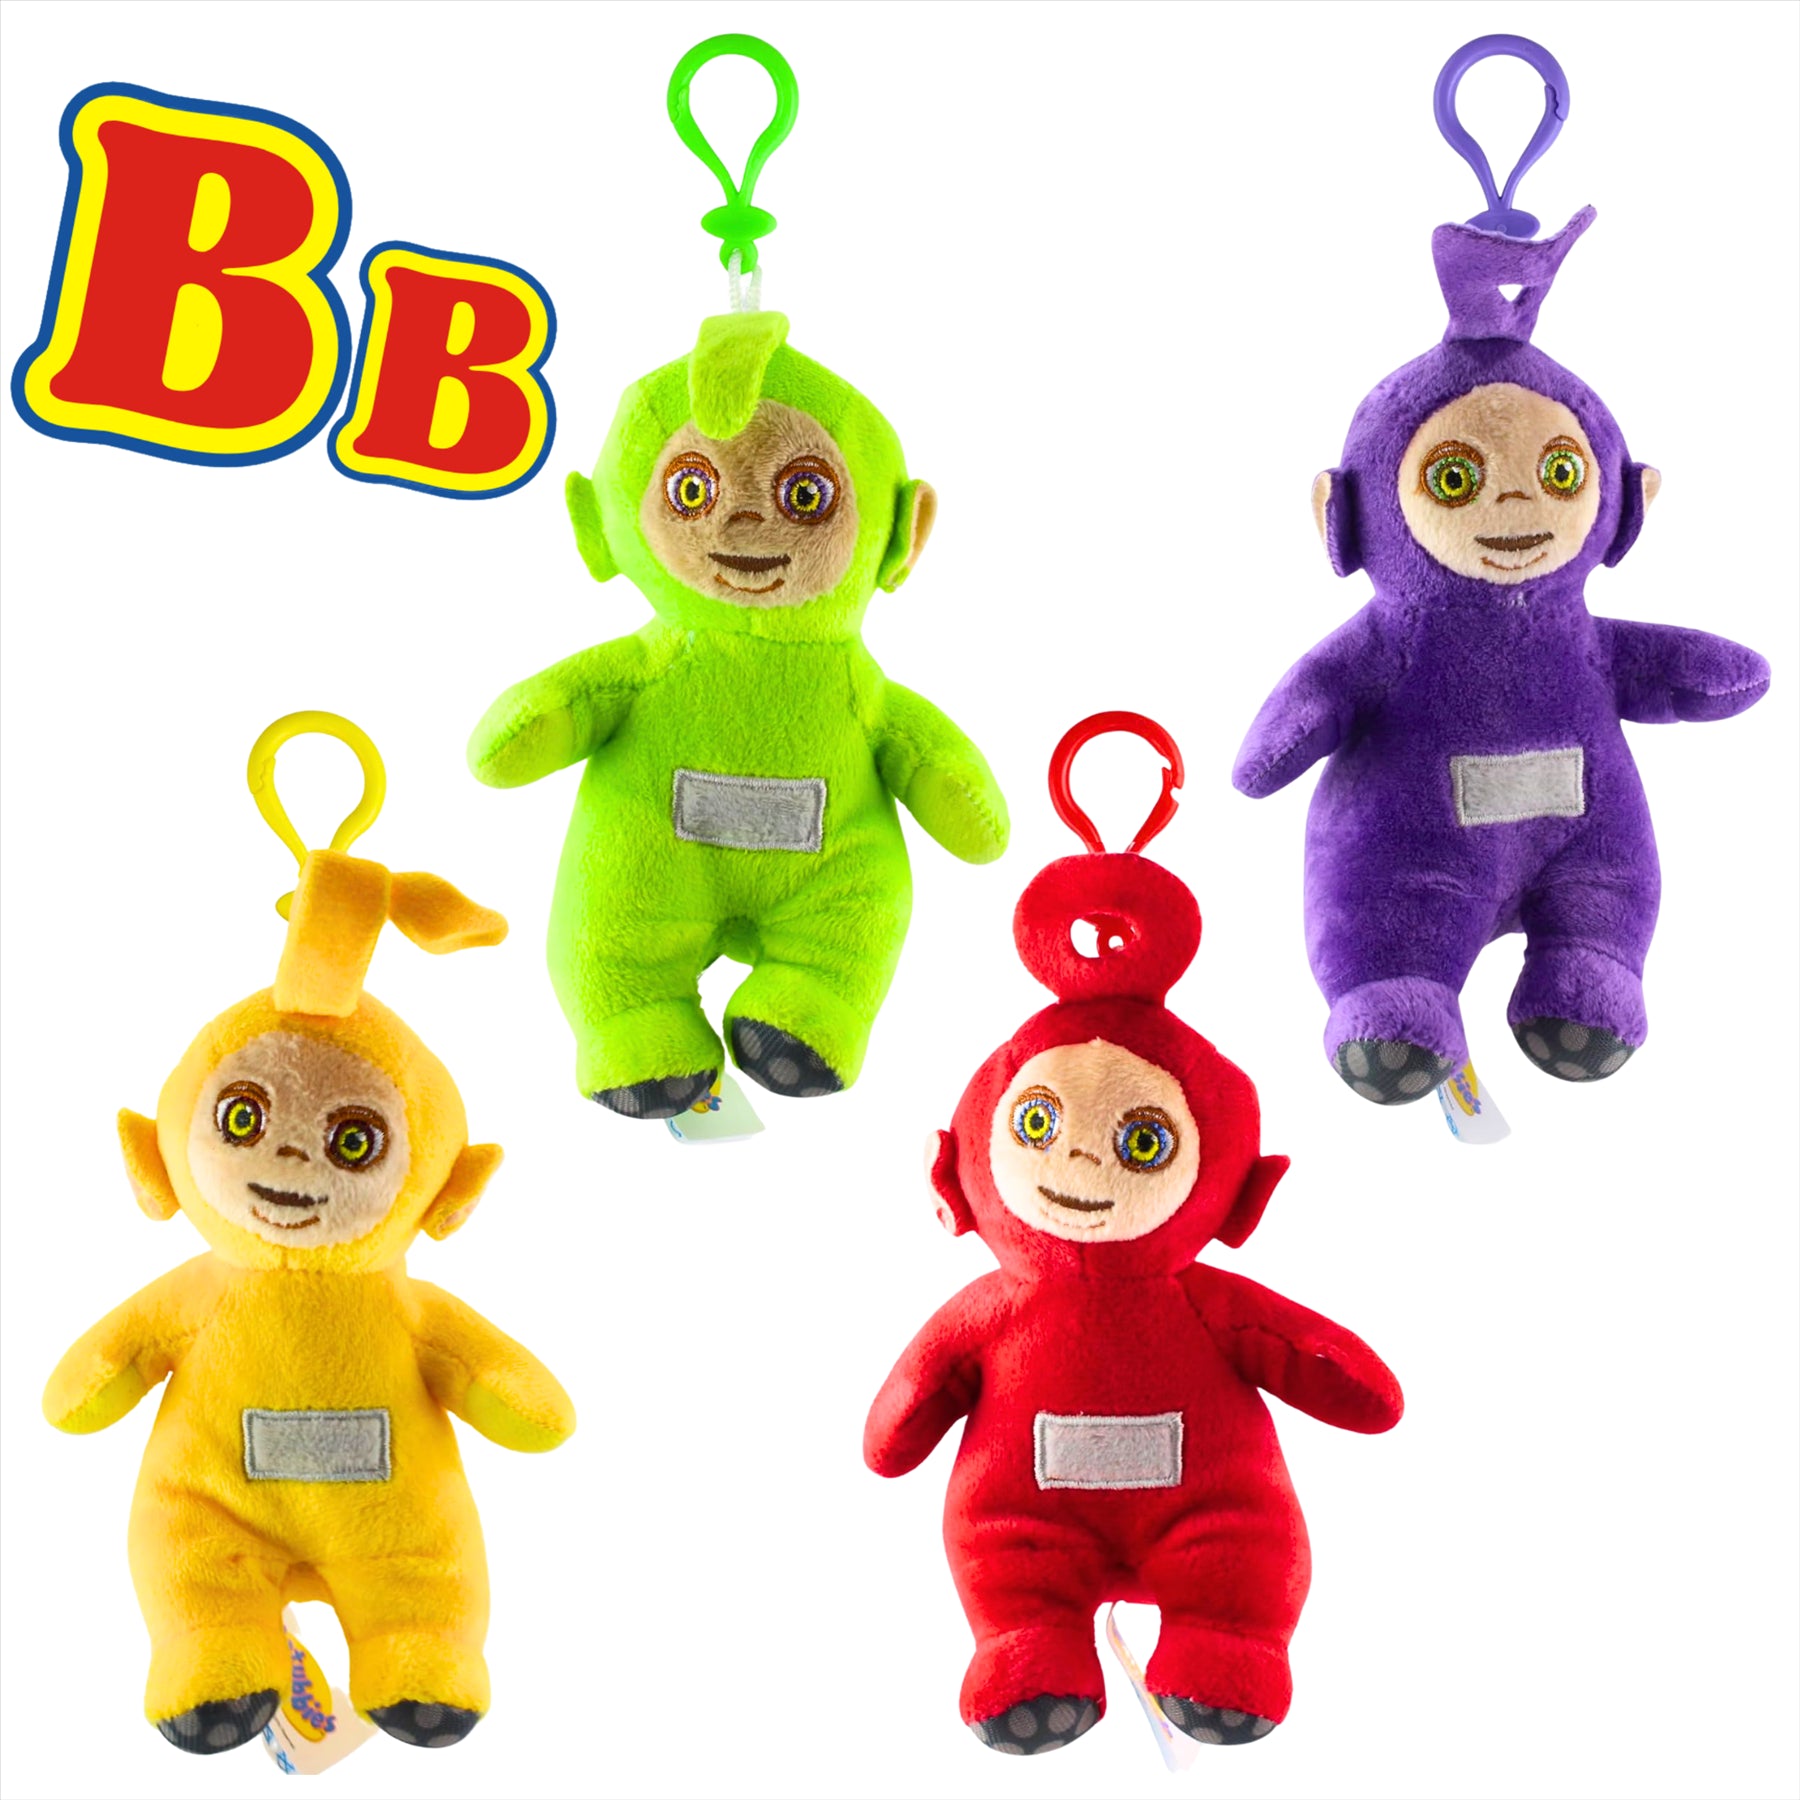 Teletubbies Super Soft Gift Quality 12cm Embroidered Plush Keyclips Set of All 4 - Tinky Winky, Dipsy, Laa-Laa, and Po - Toptoys2u